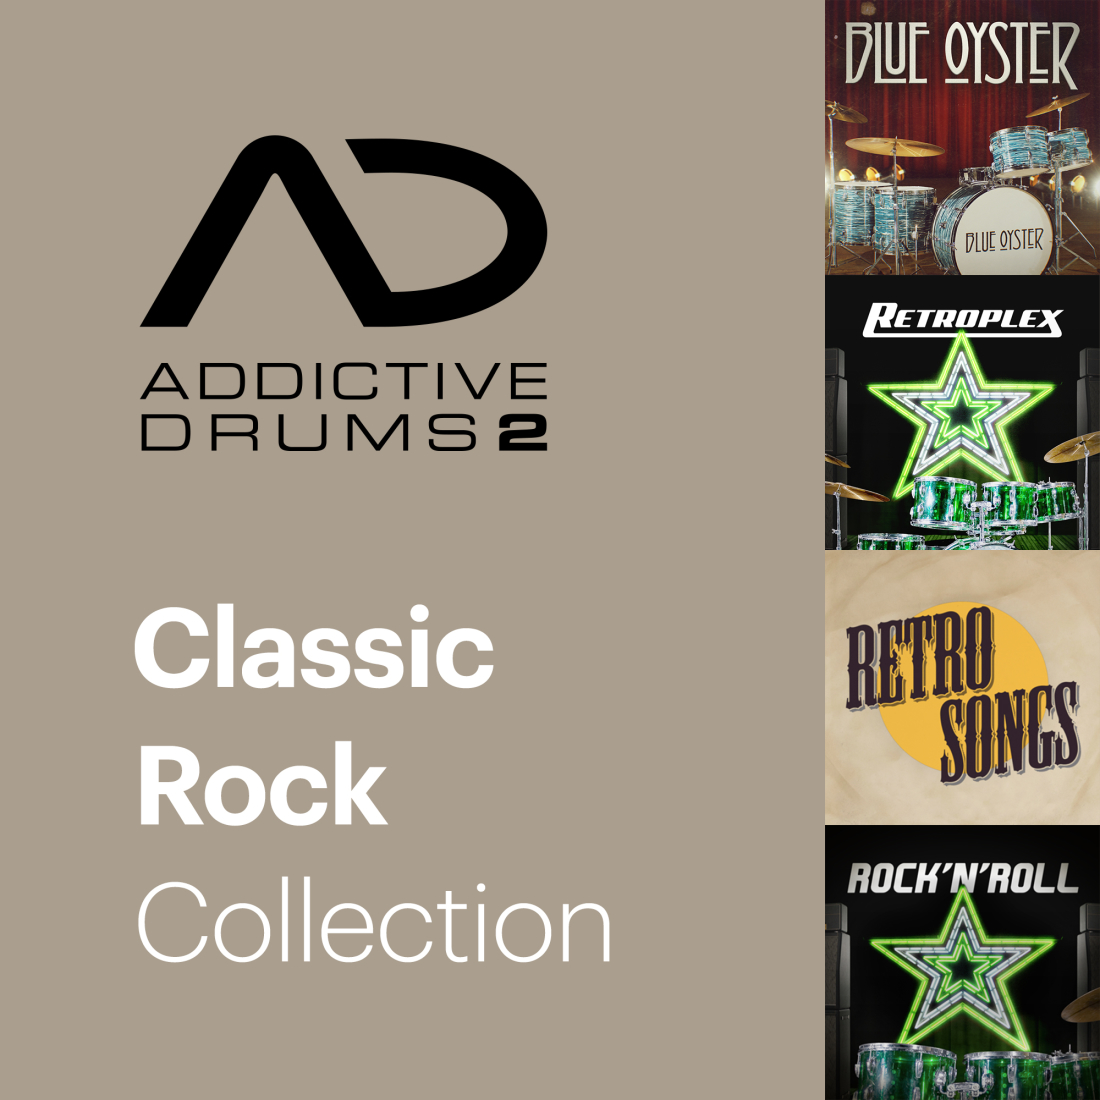 Addictive Drums 2: Classic Rock Collection - Download